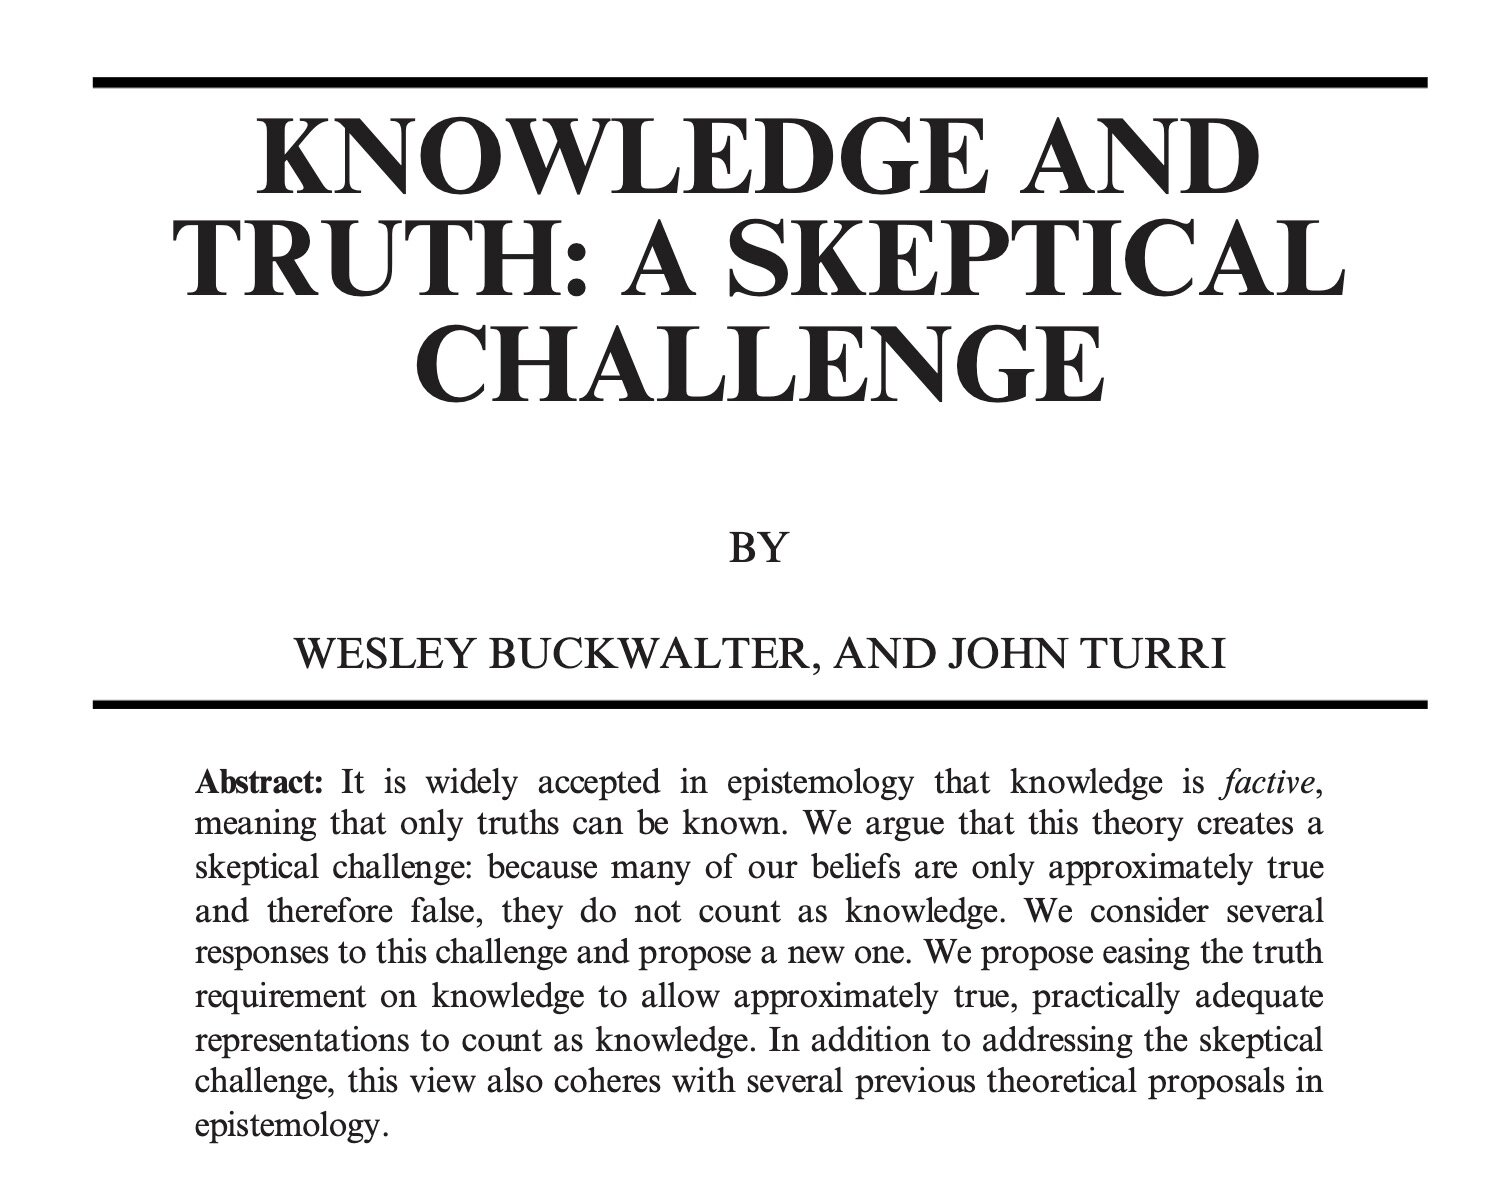 Knowledge and truth: A skeptical challenge